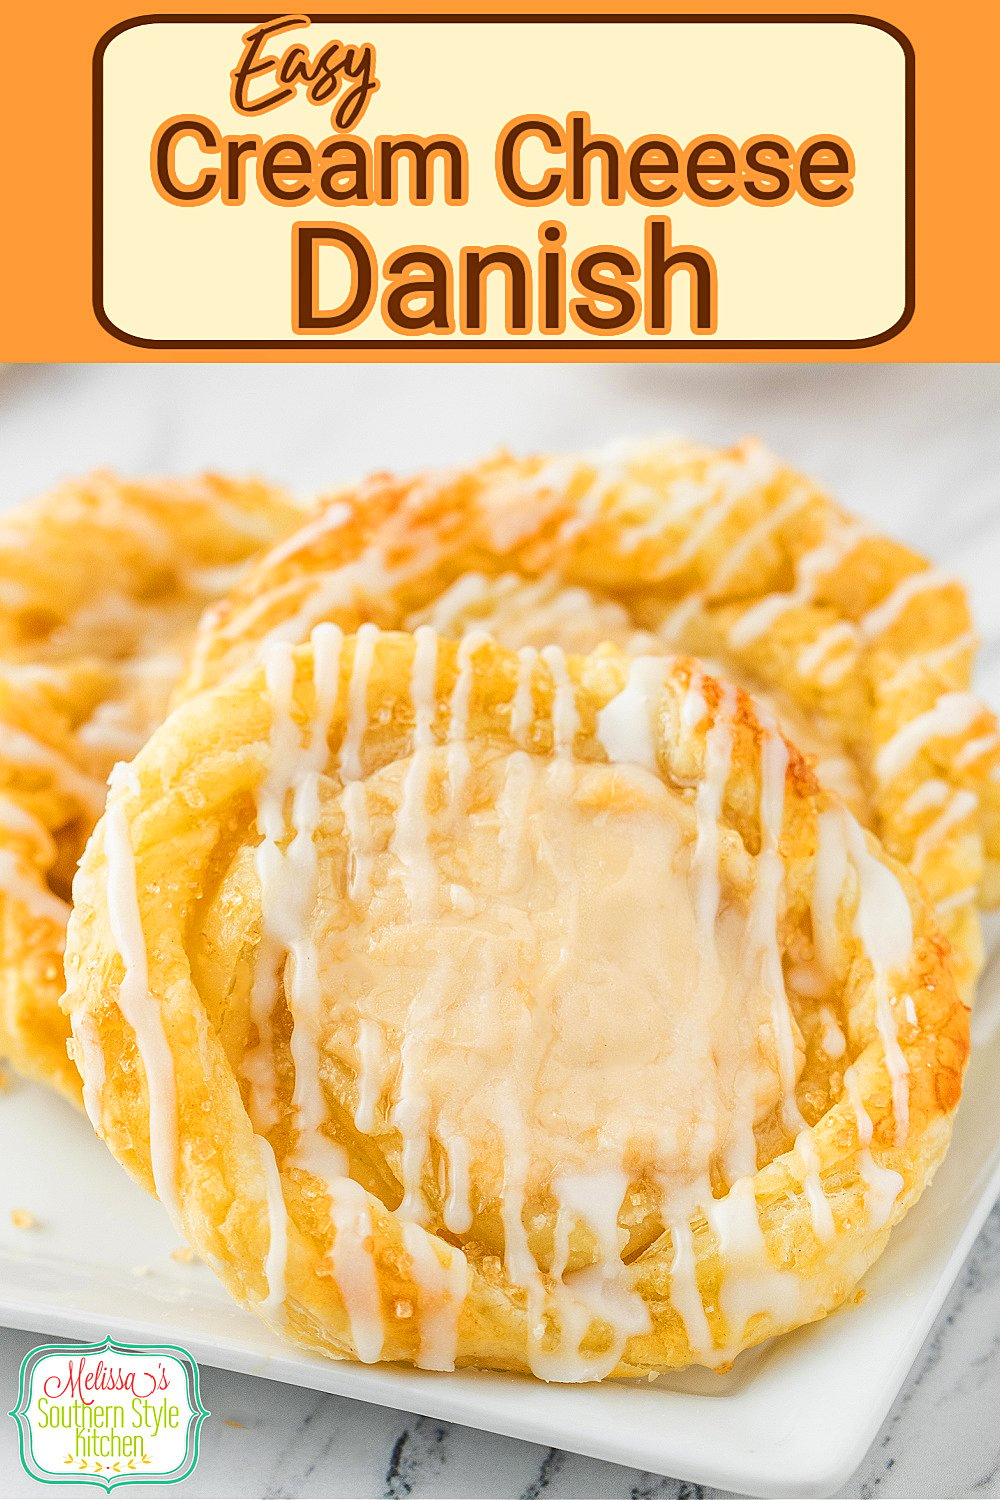 These easy Cream Cheese Danish are made using puff pastry filled with a sweet cheesecake-like filling. #puffpastryrecipes #danish #creamcheesedanish #easydanish #cheesecake #brunchrecipes #breakfast recipes